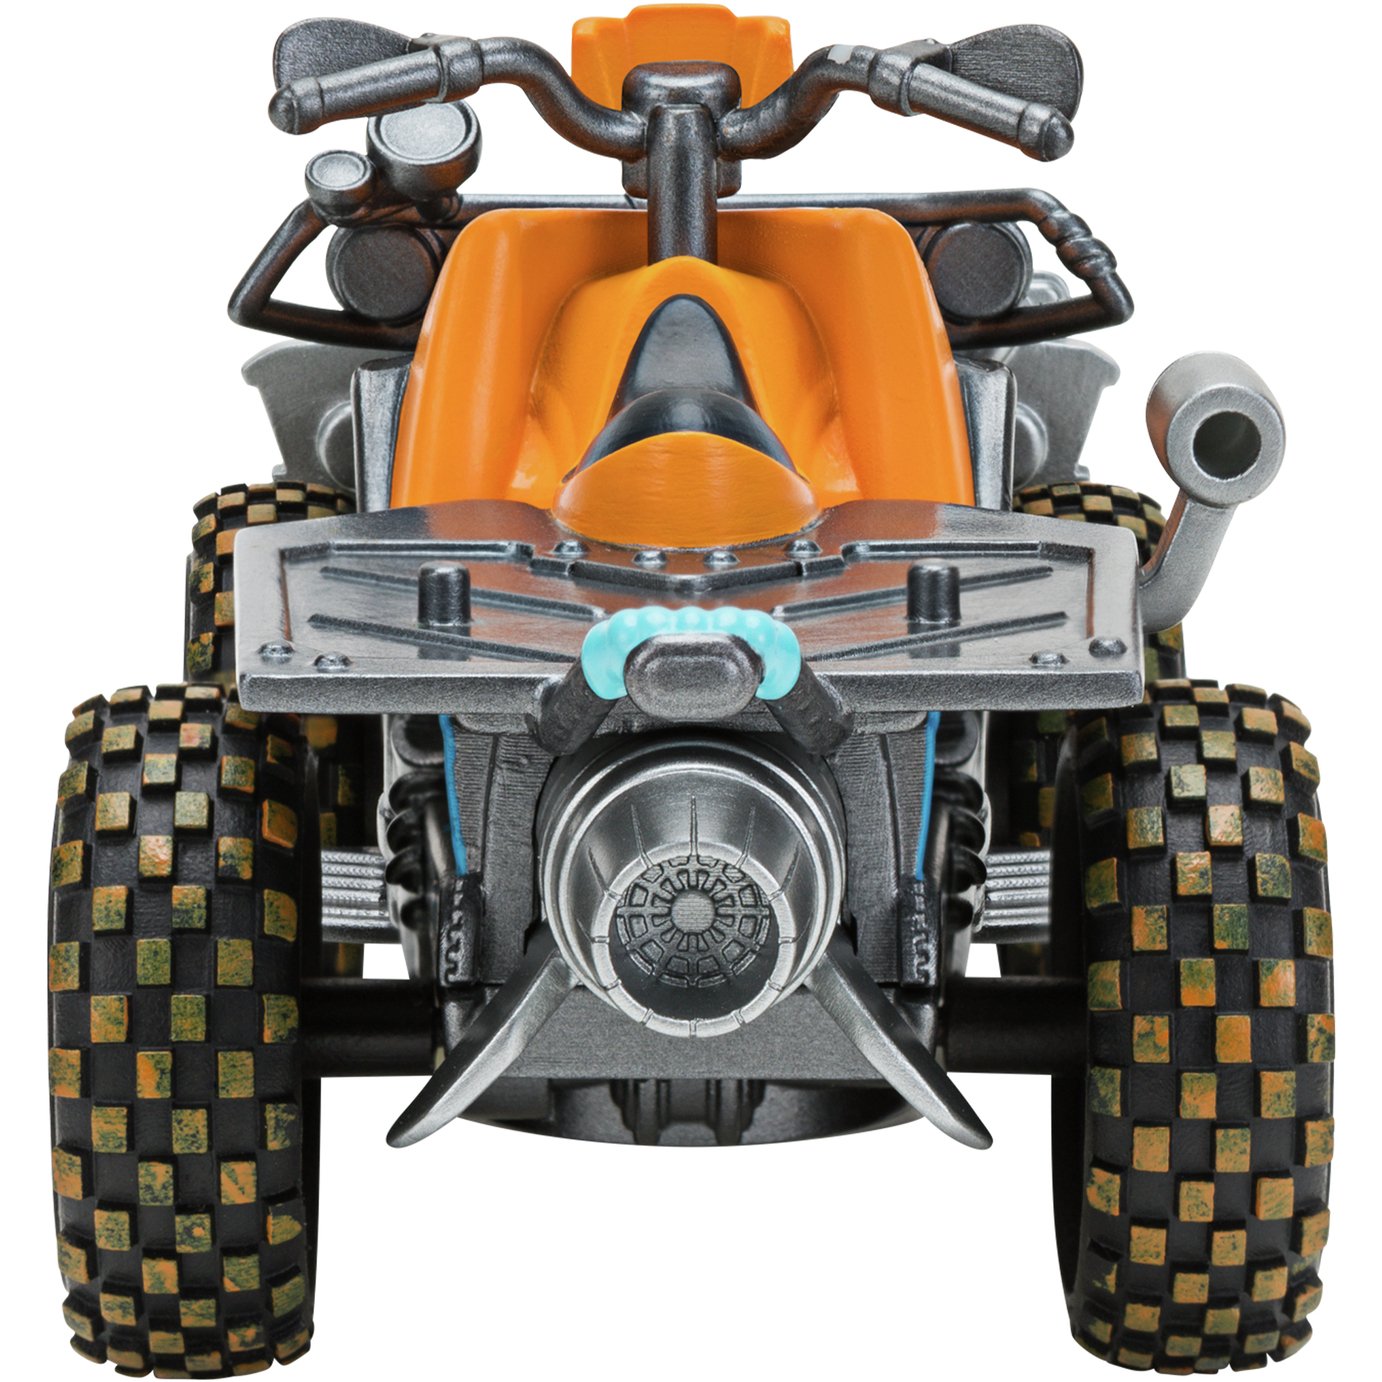 Fortnite Quadcrasher Vehicle and Figure Playset Review